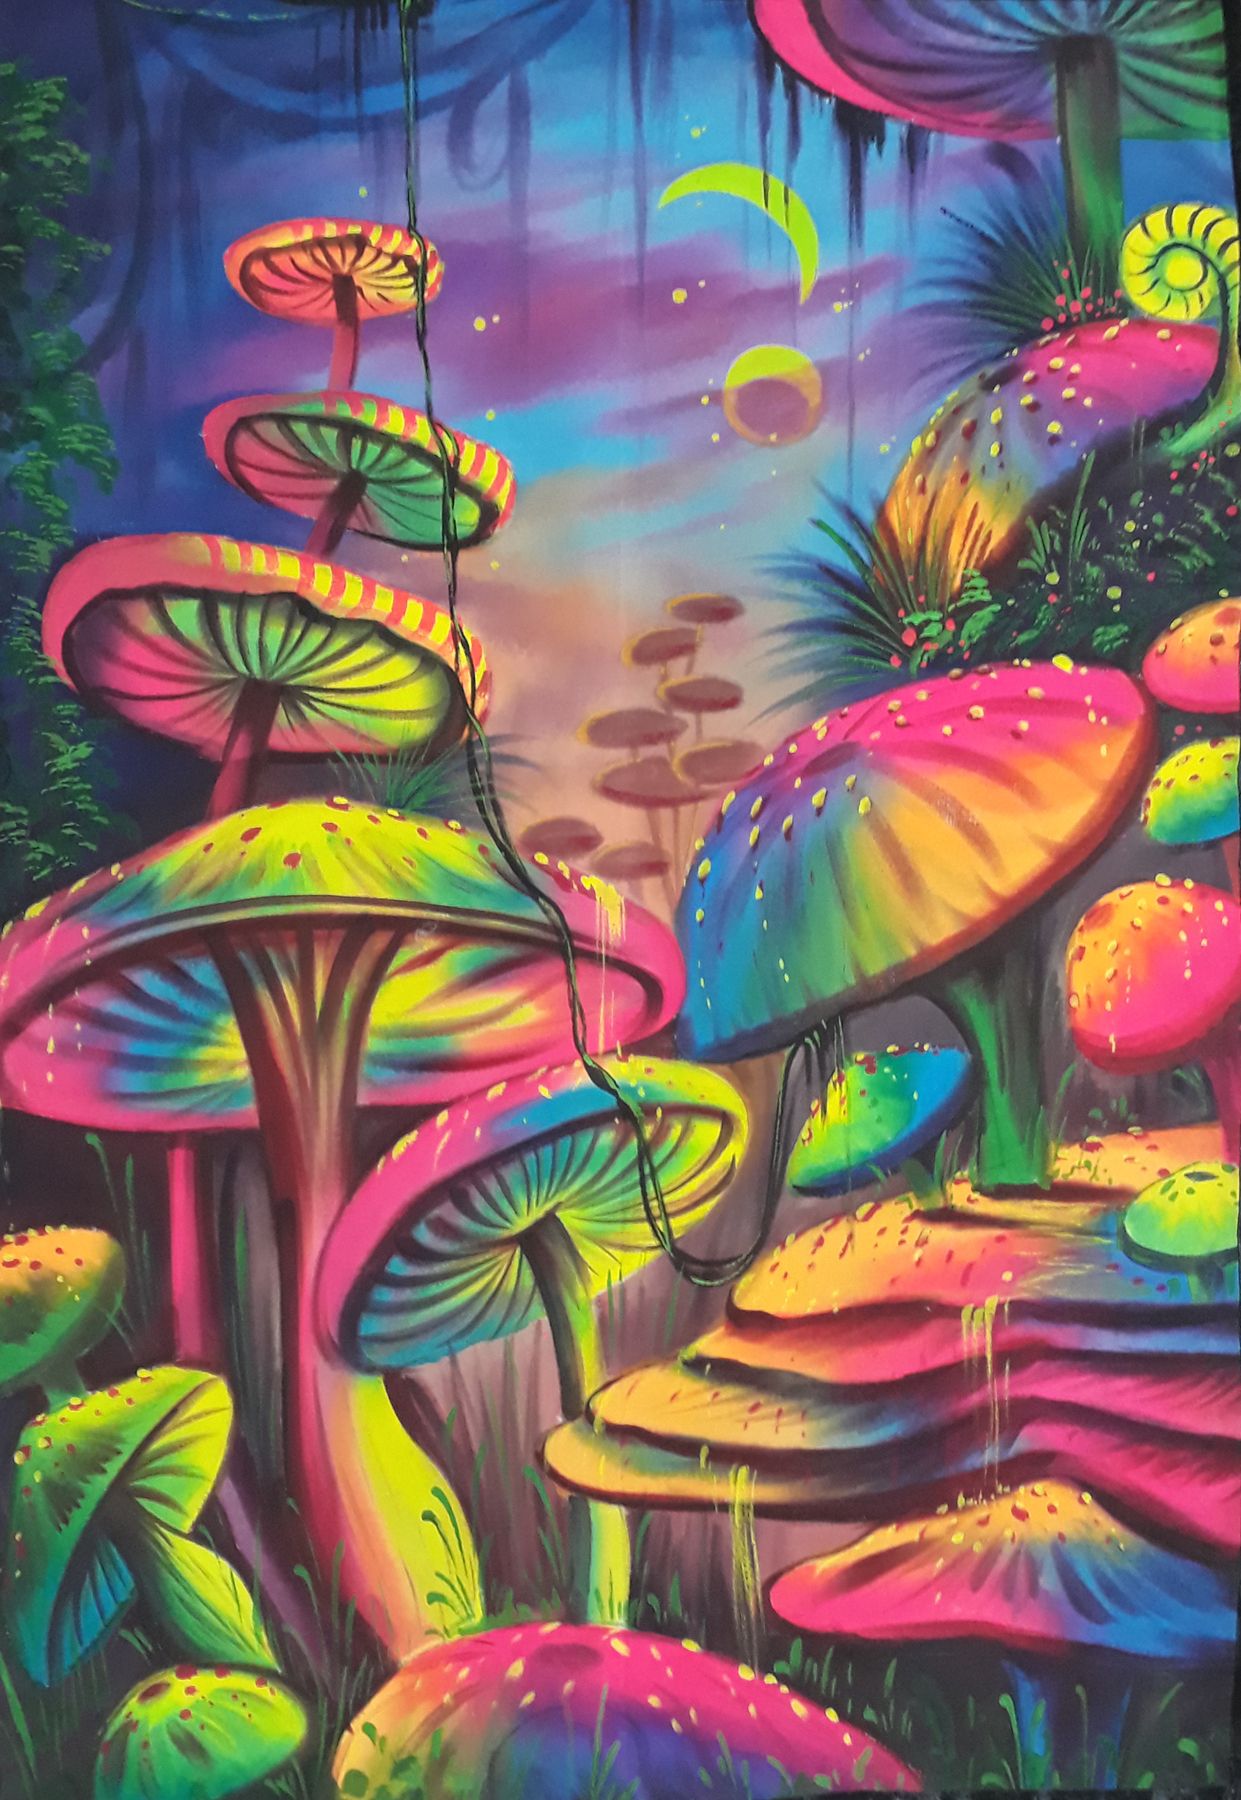 Mushrooms, Fluorescent painting, Glow in dark, UV Glow, Painting, Handmade painting. Trippy painting, Psychadelic art, Psychedelic drawings